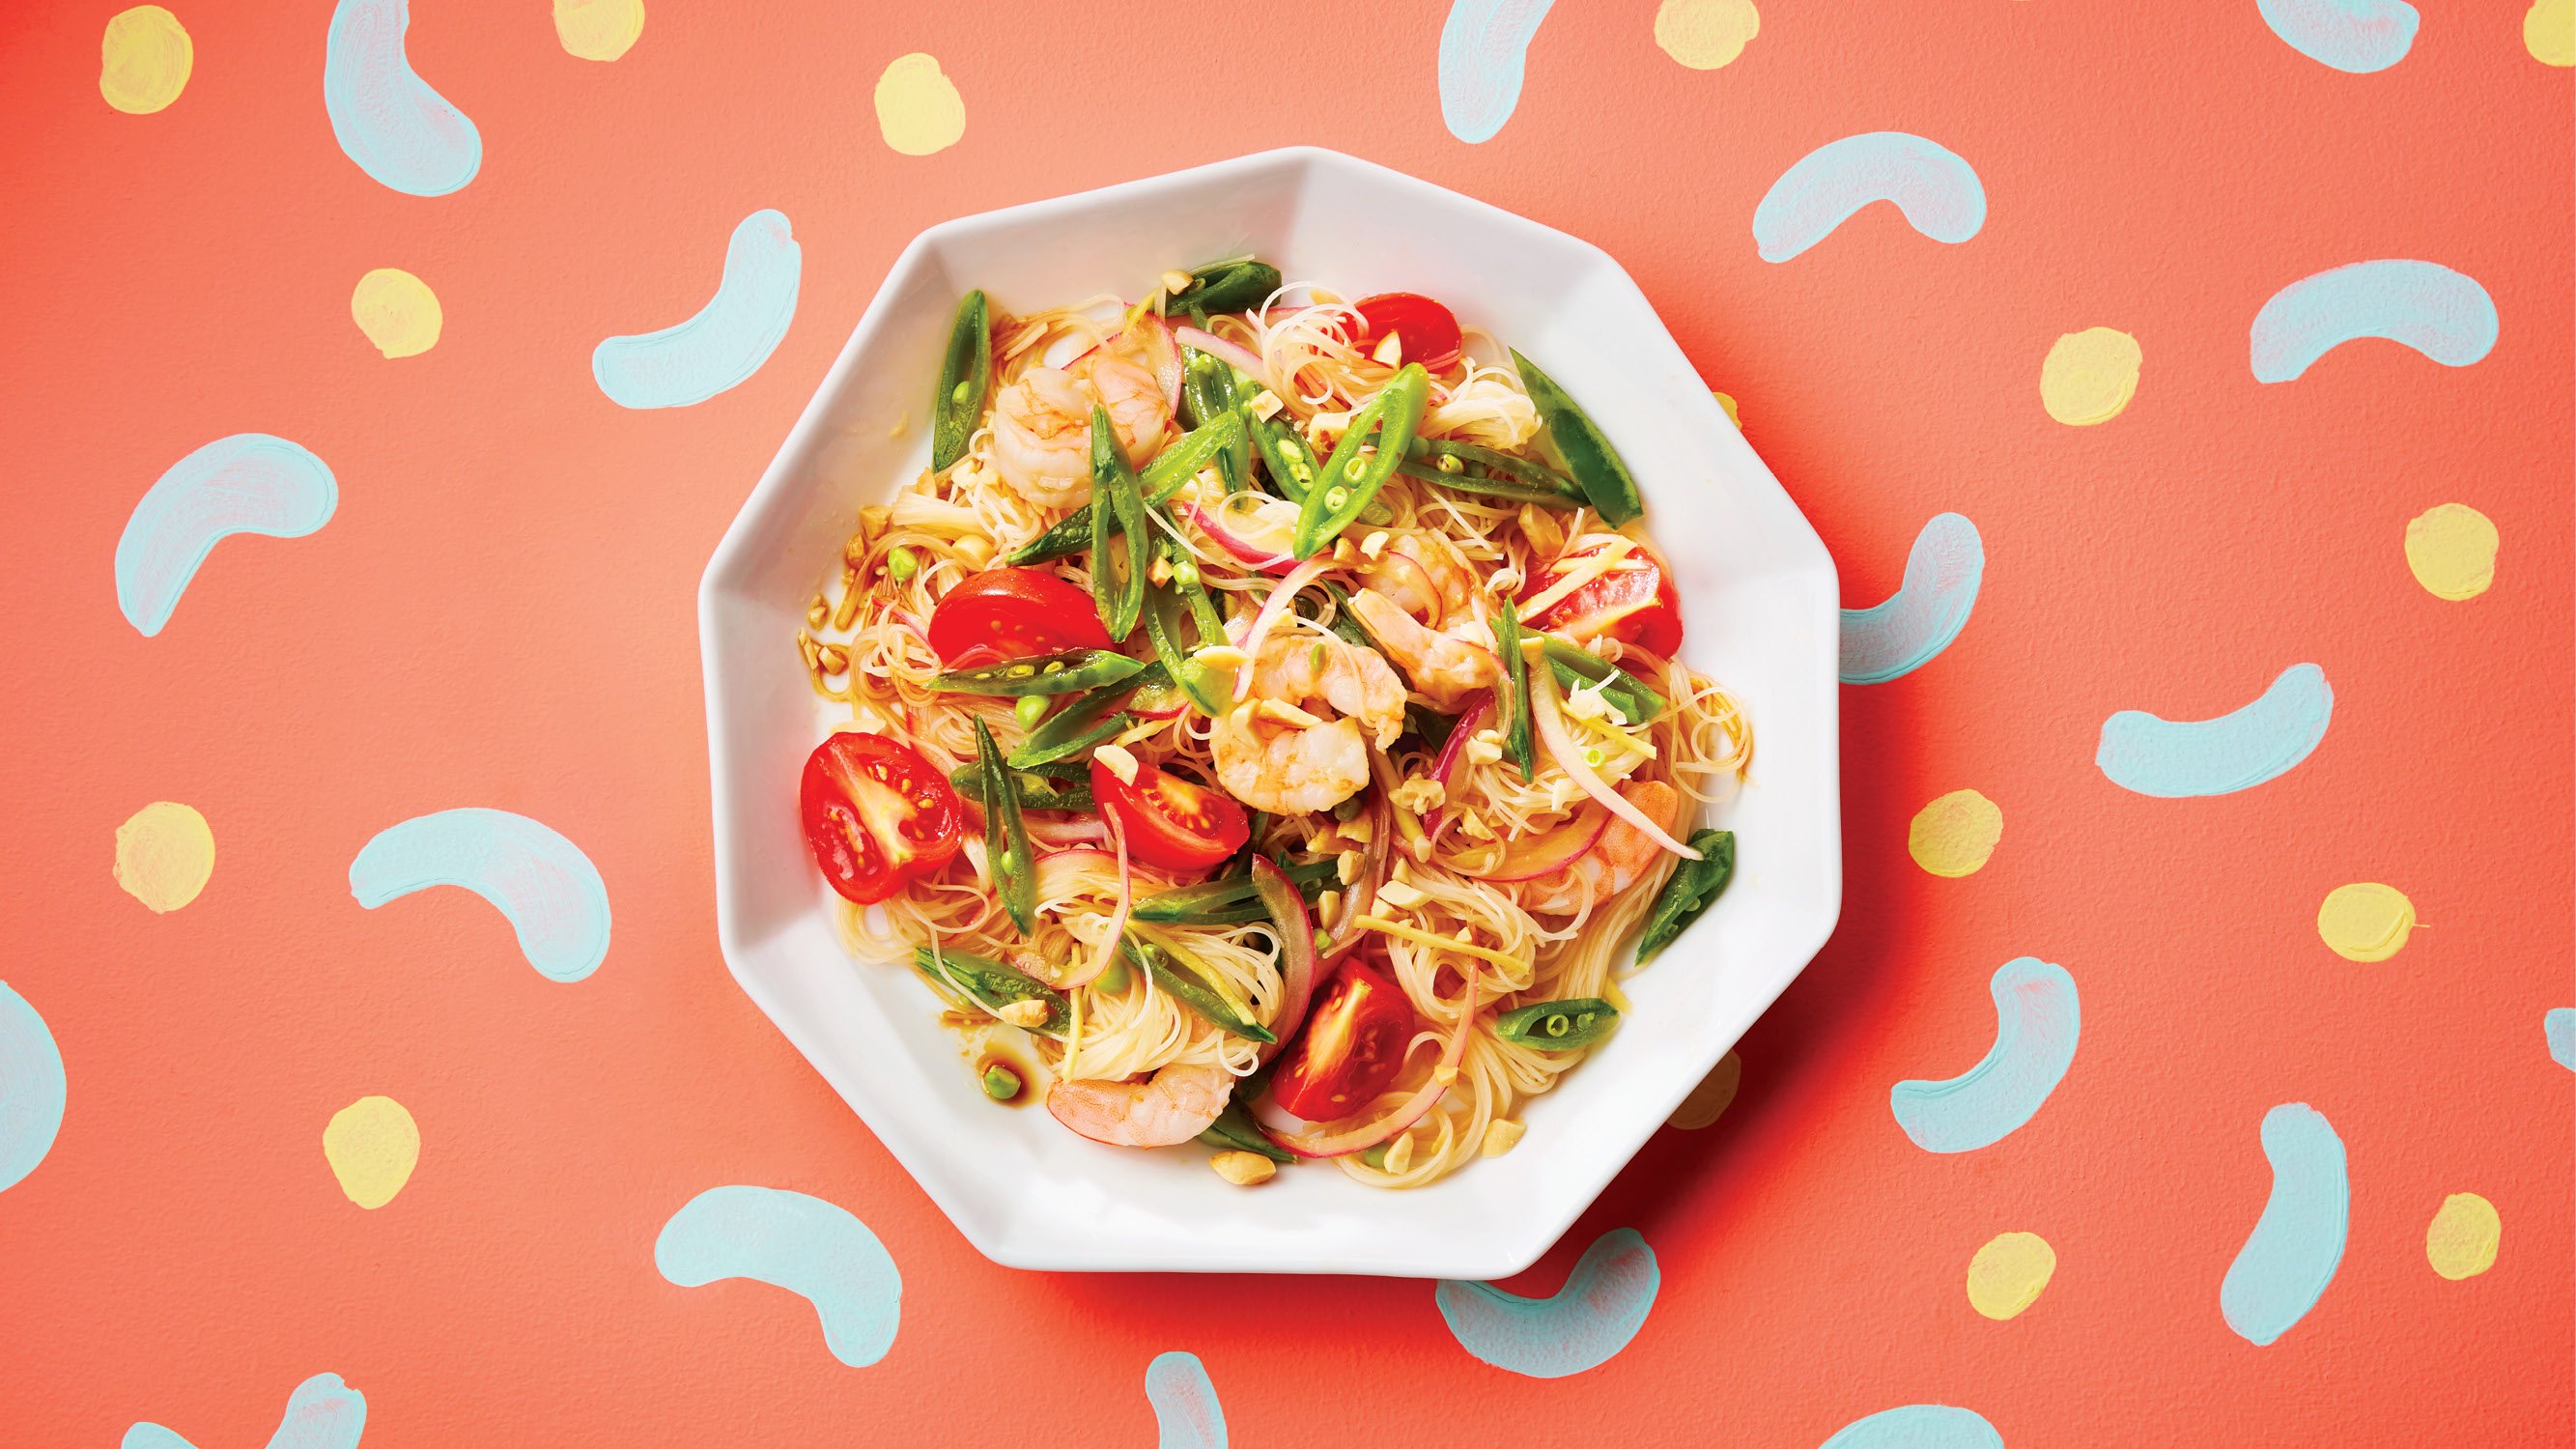 A plated dish of shrimp and vegetable noodle salad on a colourful backdrop